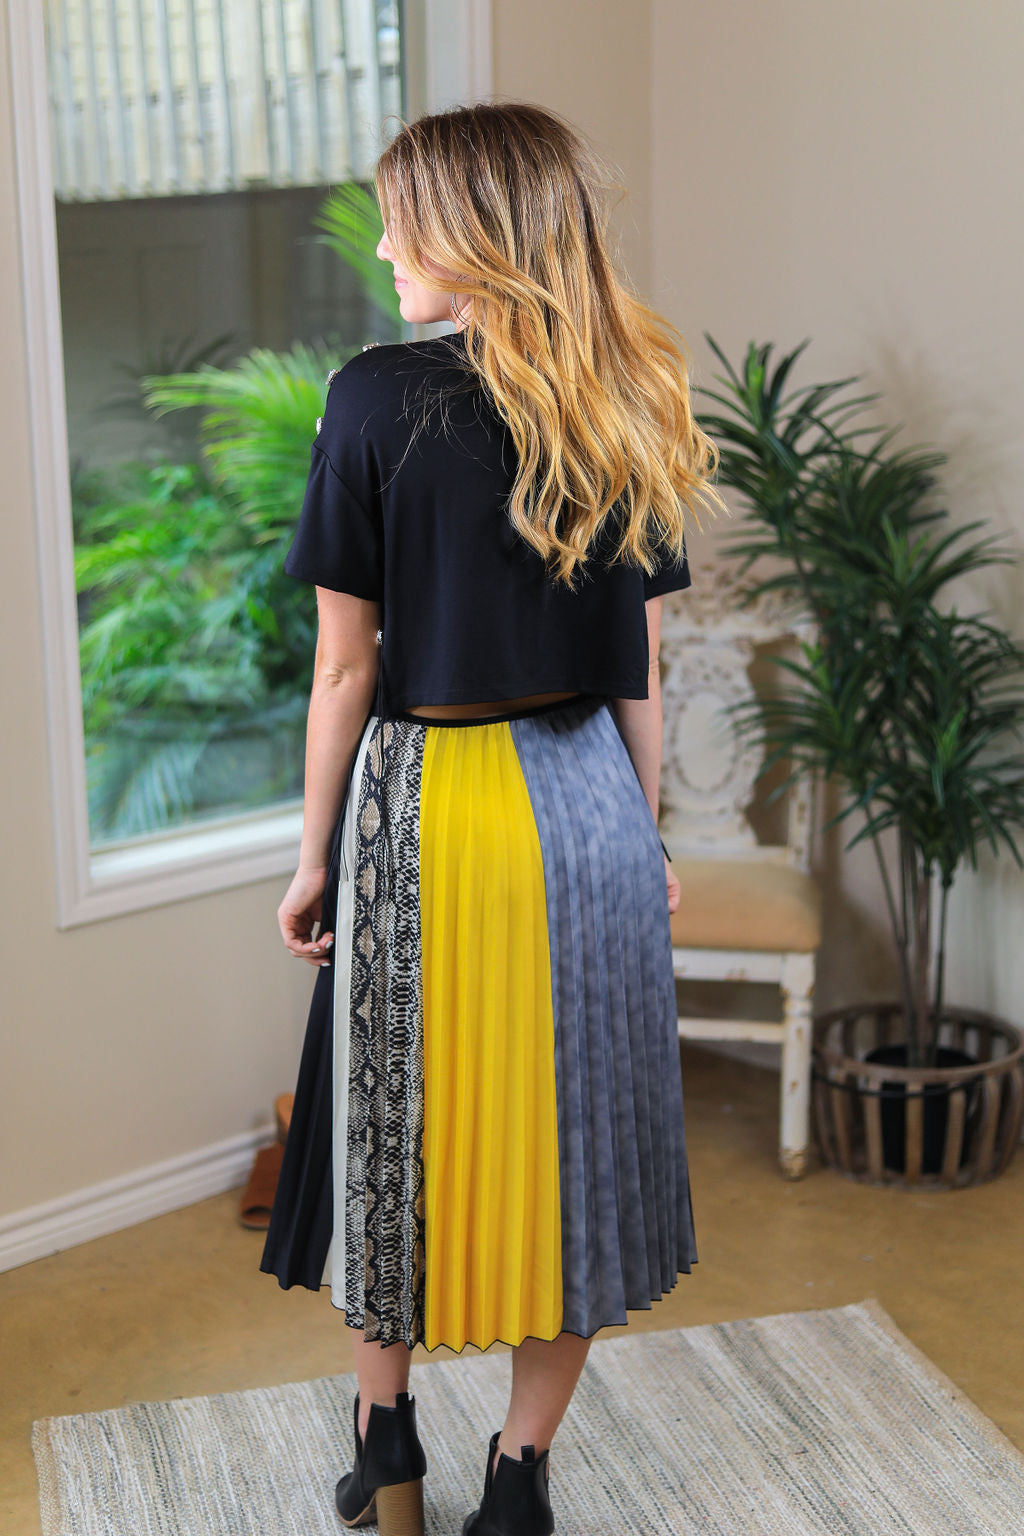 Downtown Feels Snake Skin Color Block Pleated Skirt in Mustard Yellow